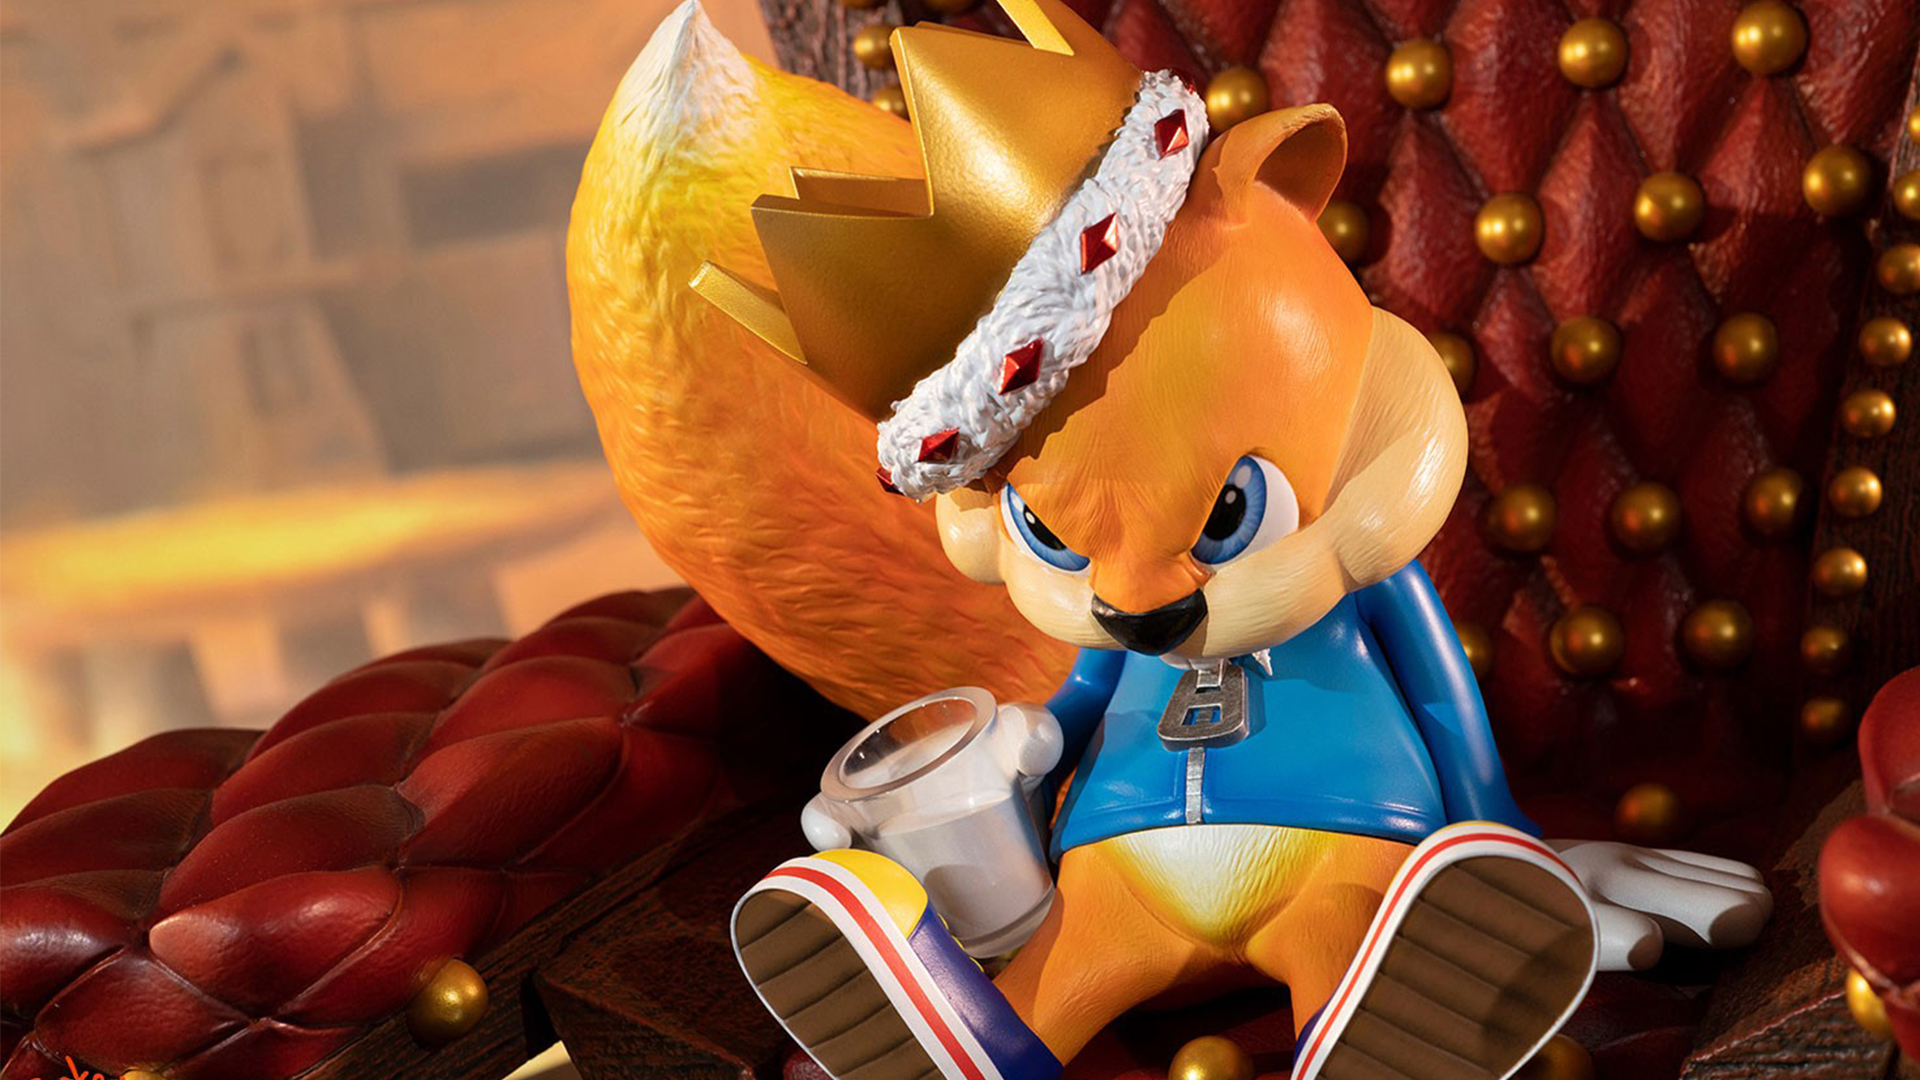 Conker’s Bad Fur Day creator states it was "inevitable" that Rare...